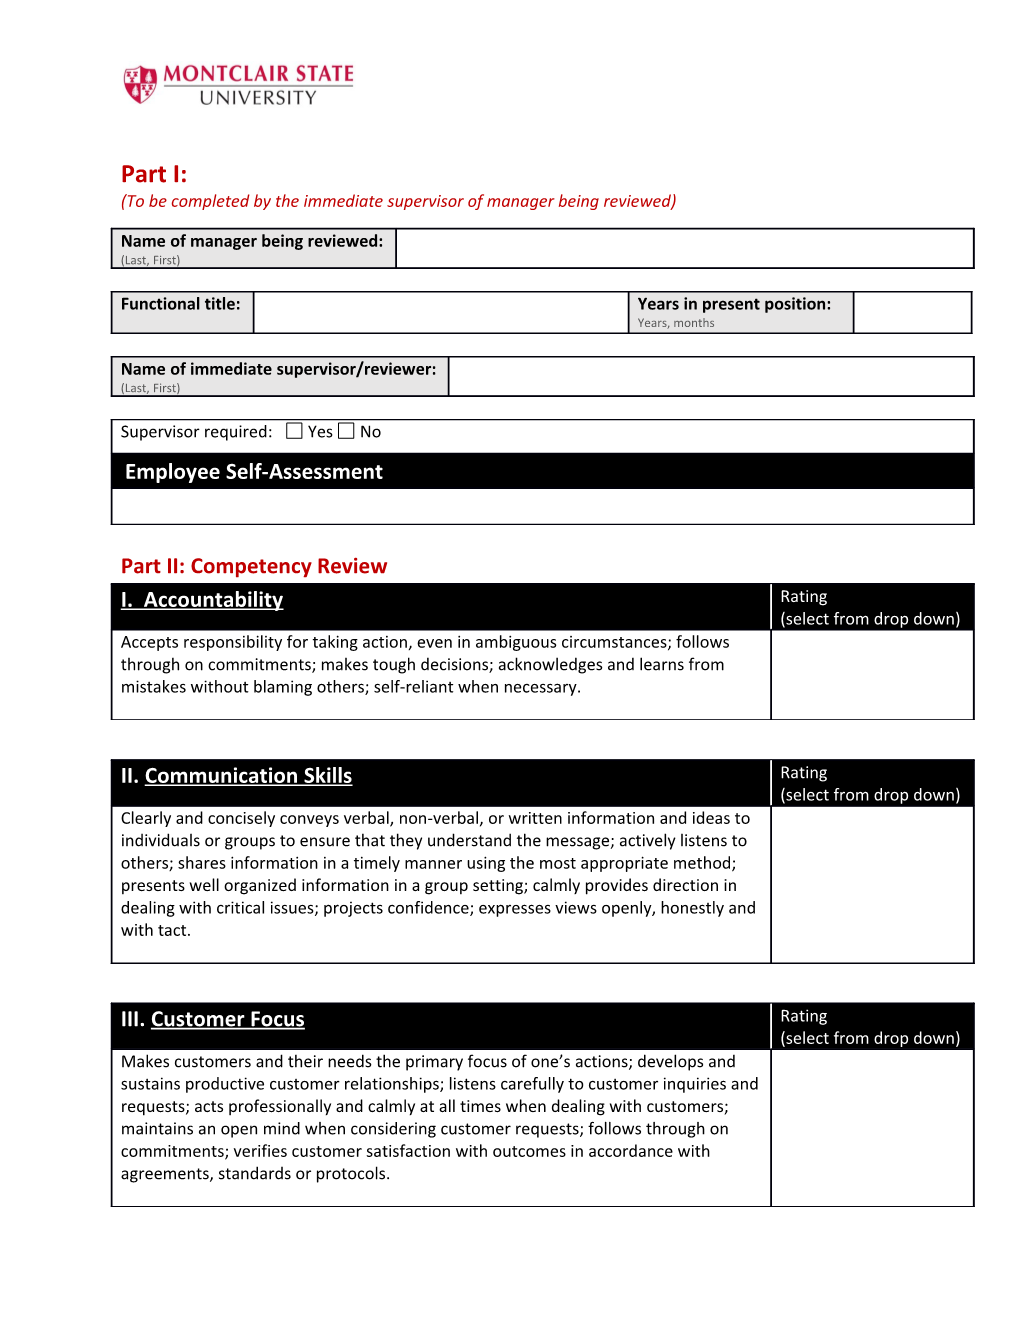 Montclair State University Managerial Performance Evaluation and Reappointment Recommendation